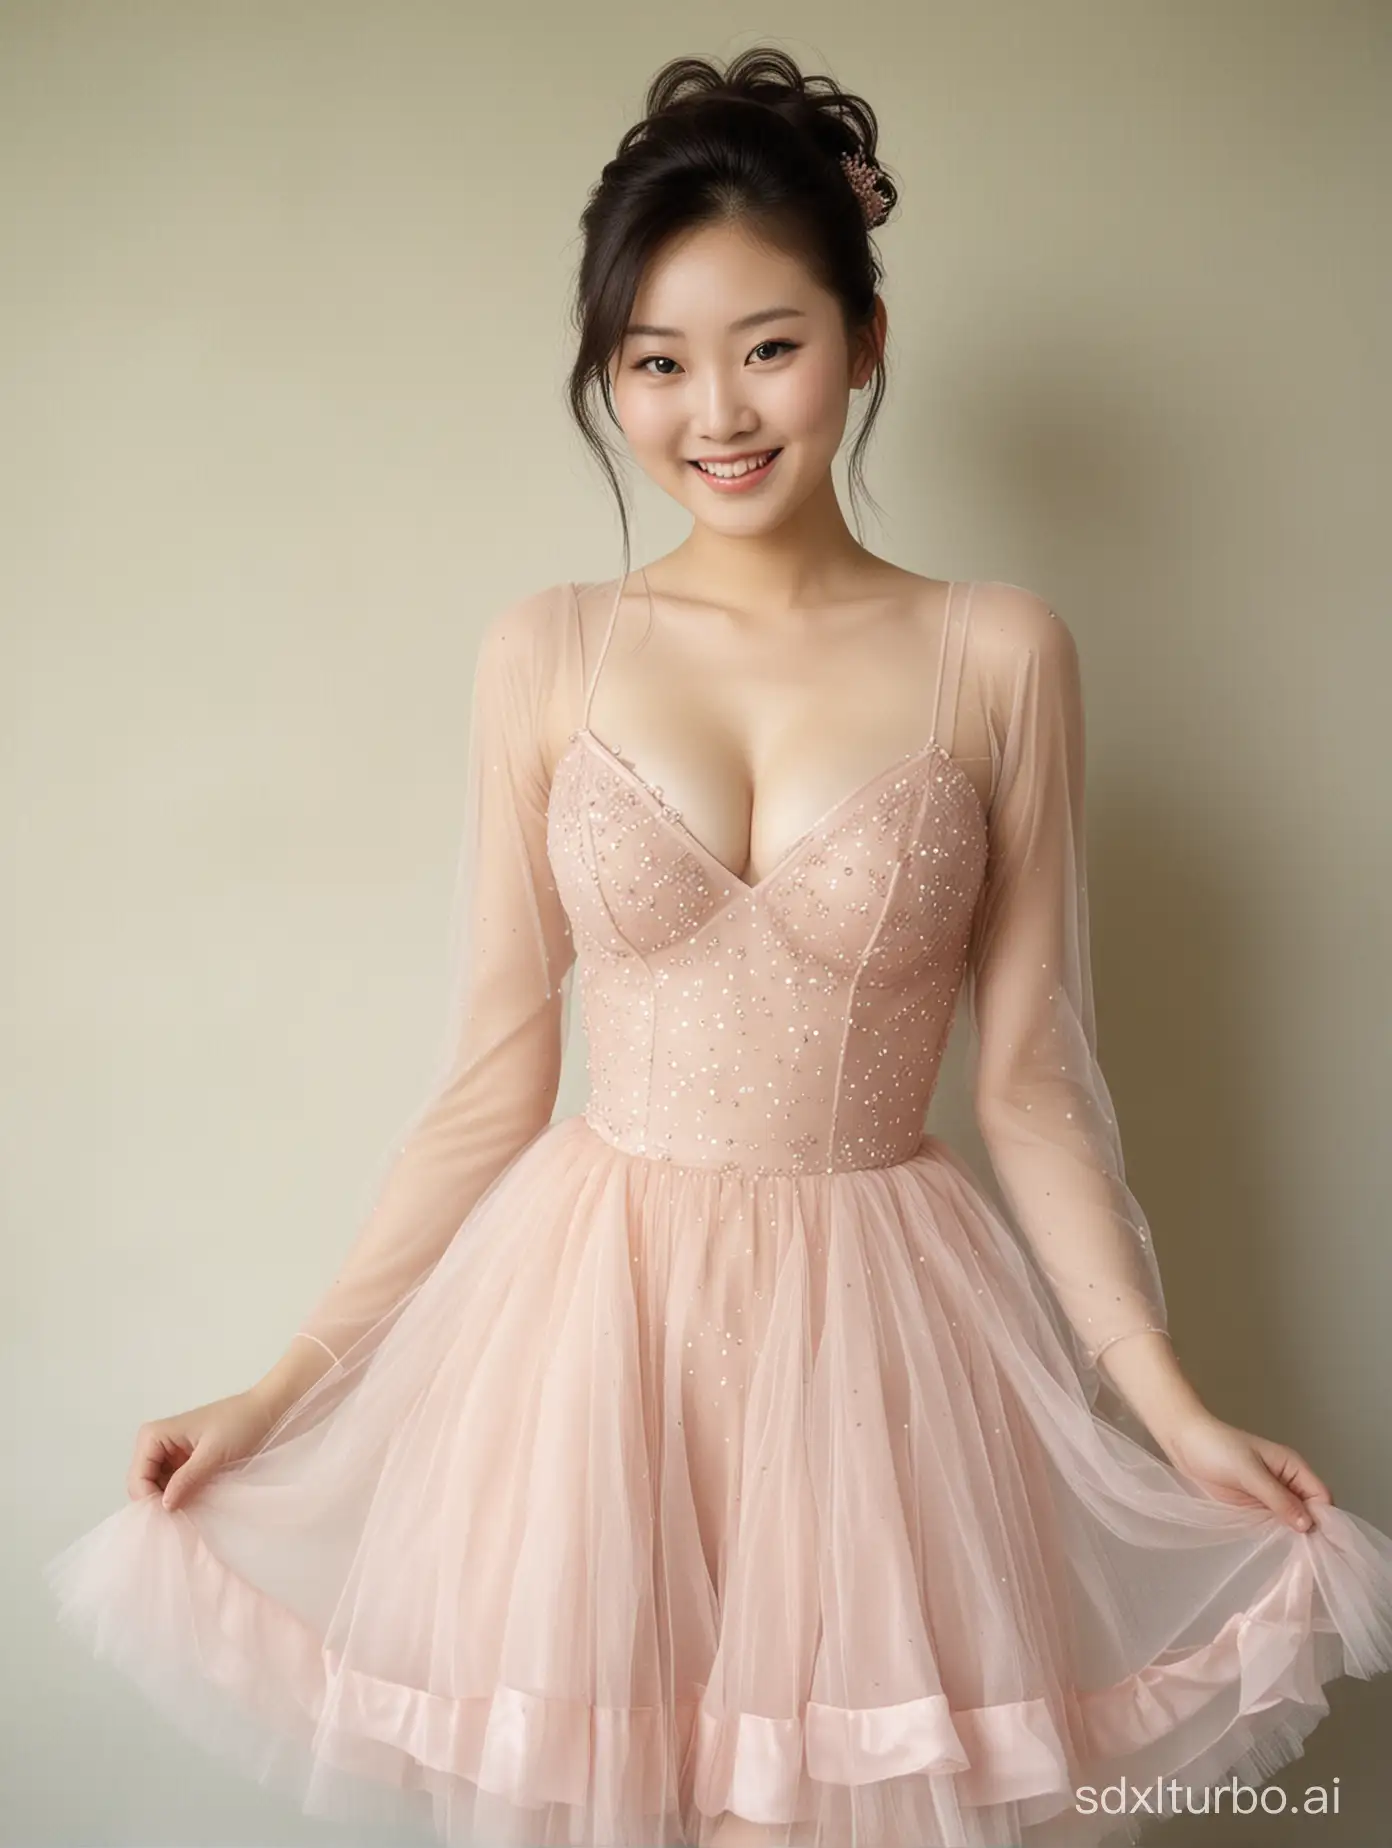 Young-Chinese-Woman-in-Sheer-Tulle-Dress-Smiling